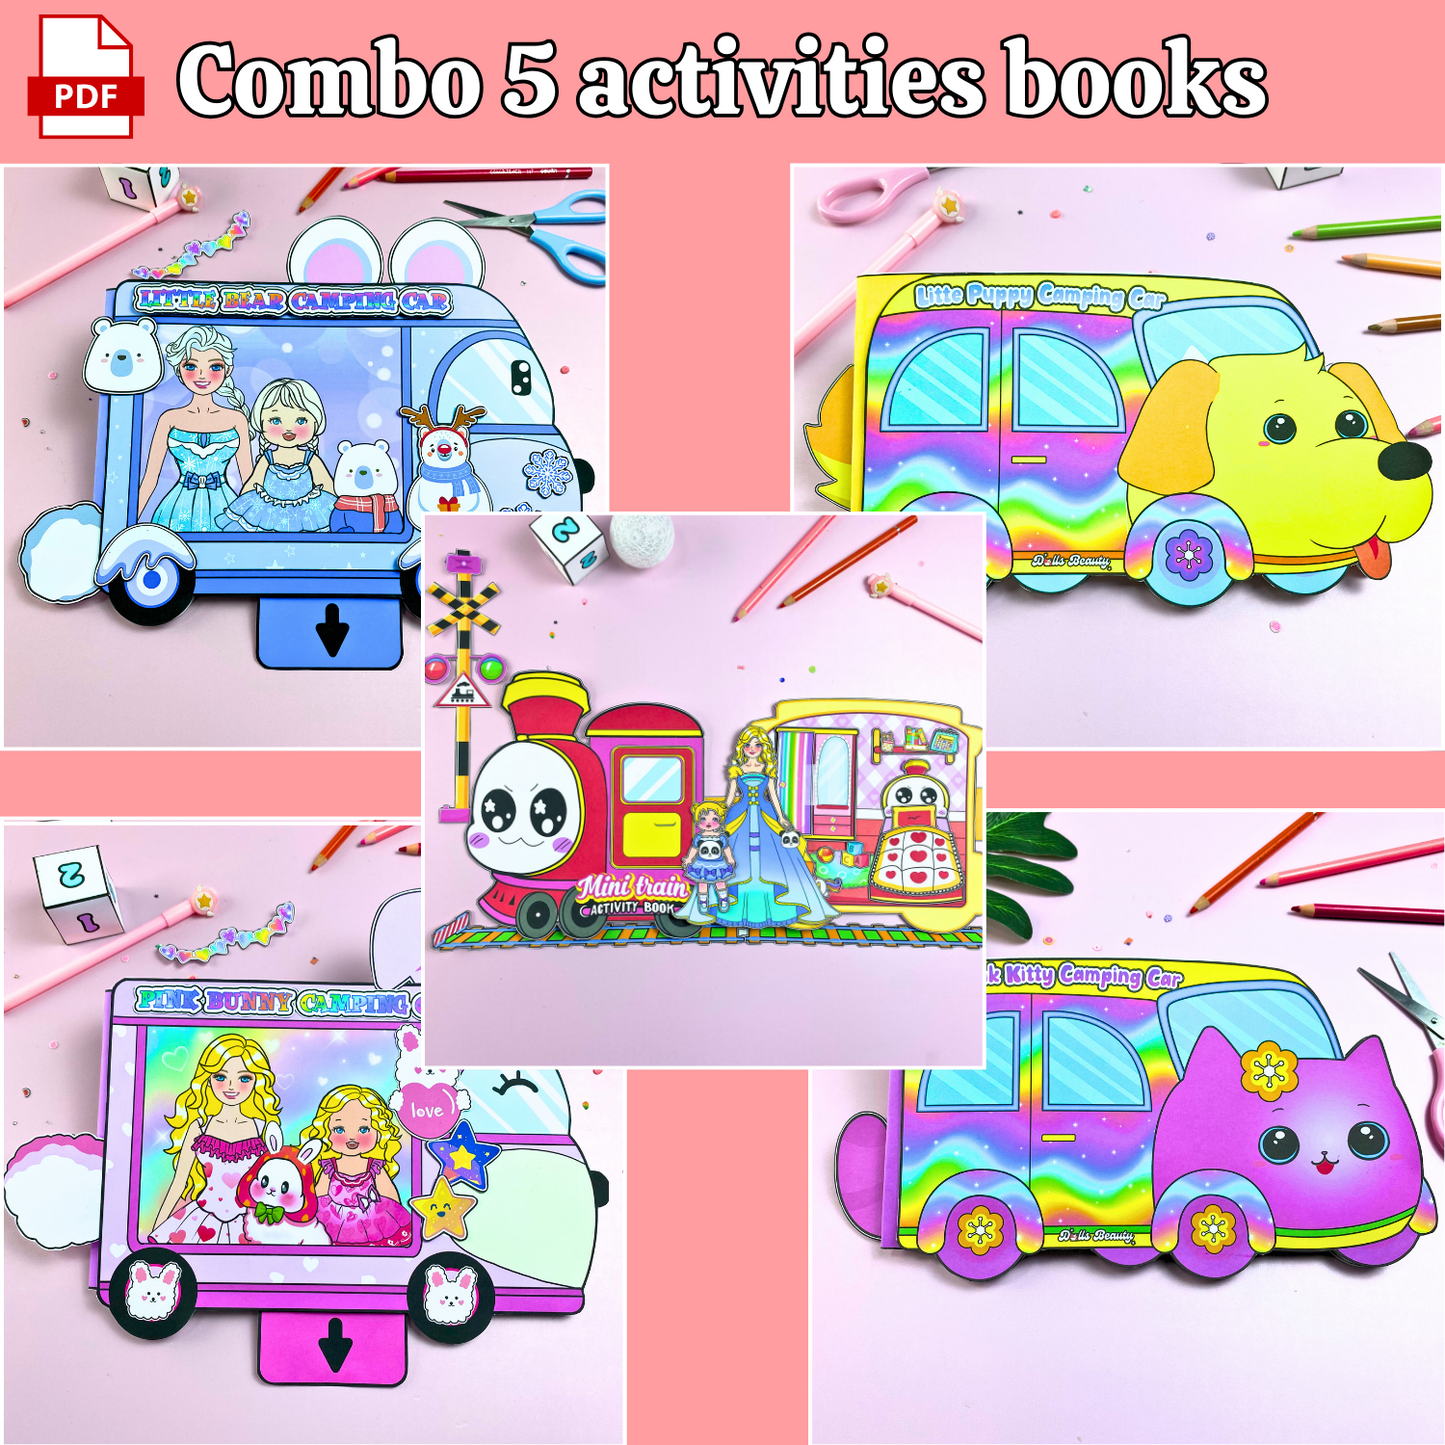 Education Activity Book | Puppy Camping Car - Fun Paper Toy for kid, Unique Birthday Gifts, Family connection, Limit screen time, Boost creativity